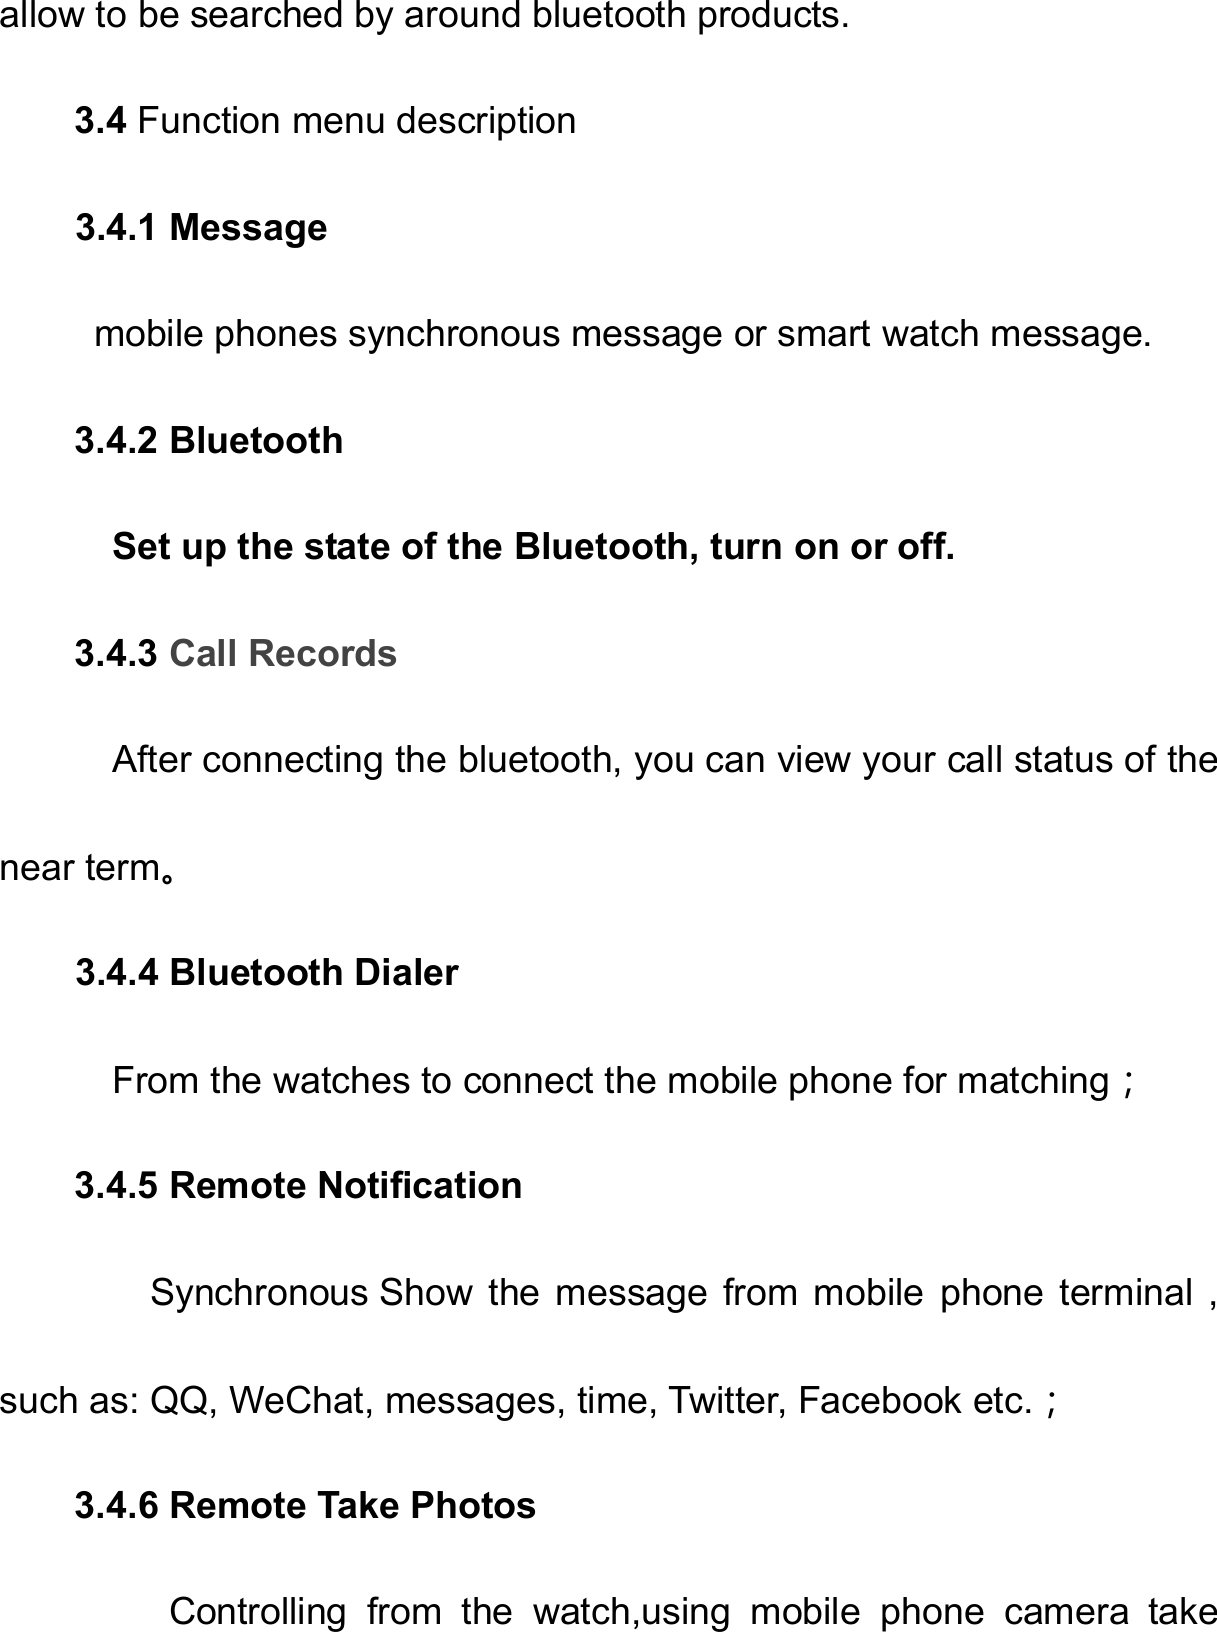   allow to be searched by around bluetooth products. 3.4 Function menu description             3.4.1 Message      mobile phones synchronous message or smart watch message. 3.4.2 Bluetooth     Set up the state of the Bluetooth, turn on or off. 3.4.3 Call Records         After connecting the bluetooth, you can view your call status of the near term。   3.4.4 Bluetooth Dialer     From the watches to connect the mobile phone for matching；  3.4.5 Remote Notification         Synchronous Show  the  message  from  mobile  phone  terminal  , such as: QQ, WeChat, messages, time, Twitter, Facebook etc.；   3.4.6 Remote Take Photos      Controlling from the watch,using mobile phone  camera  take 